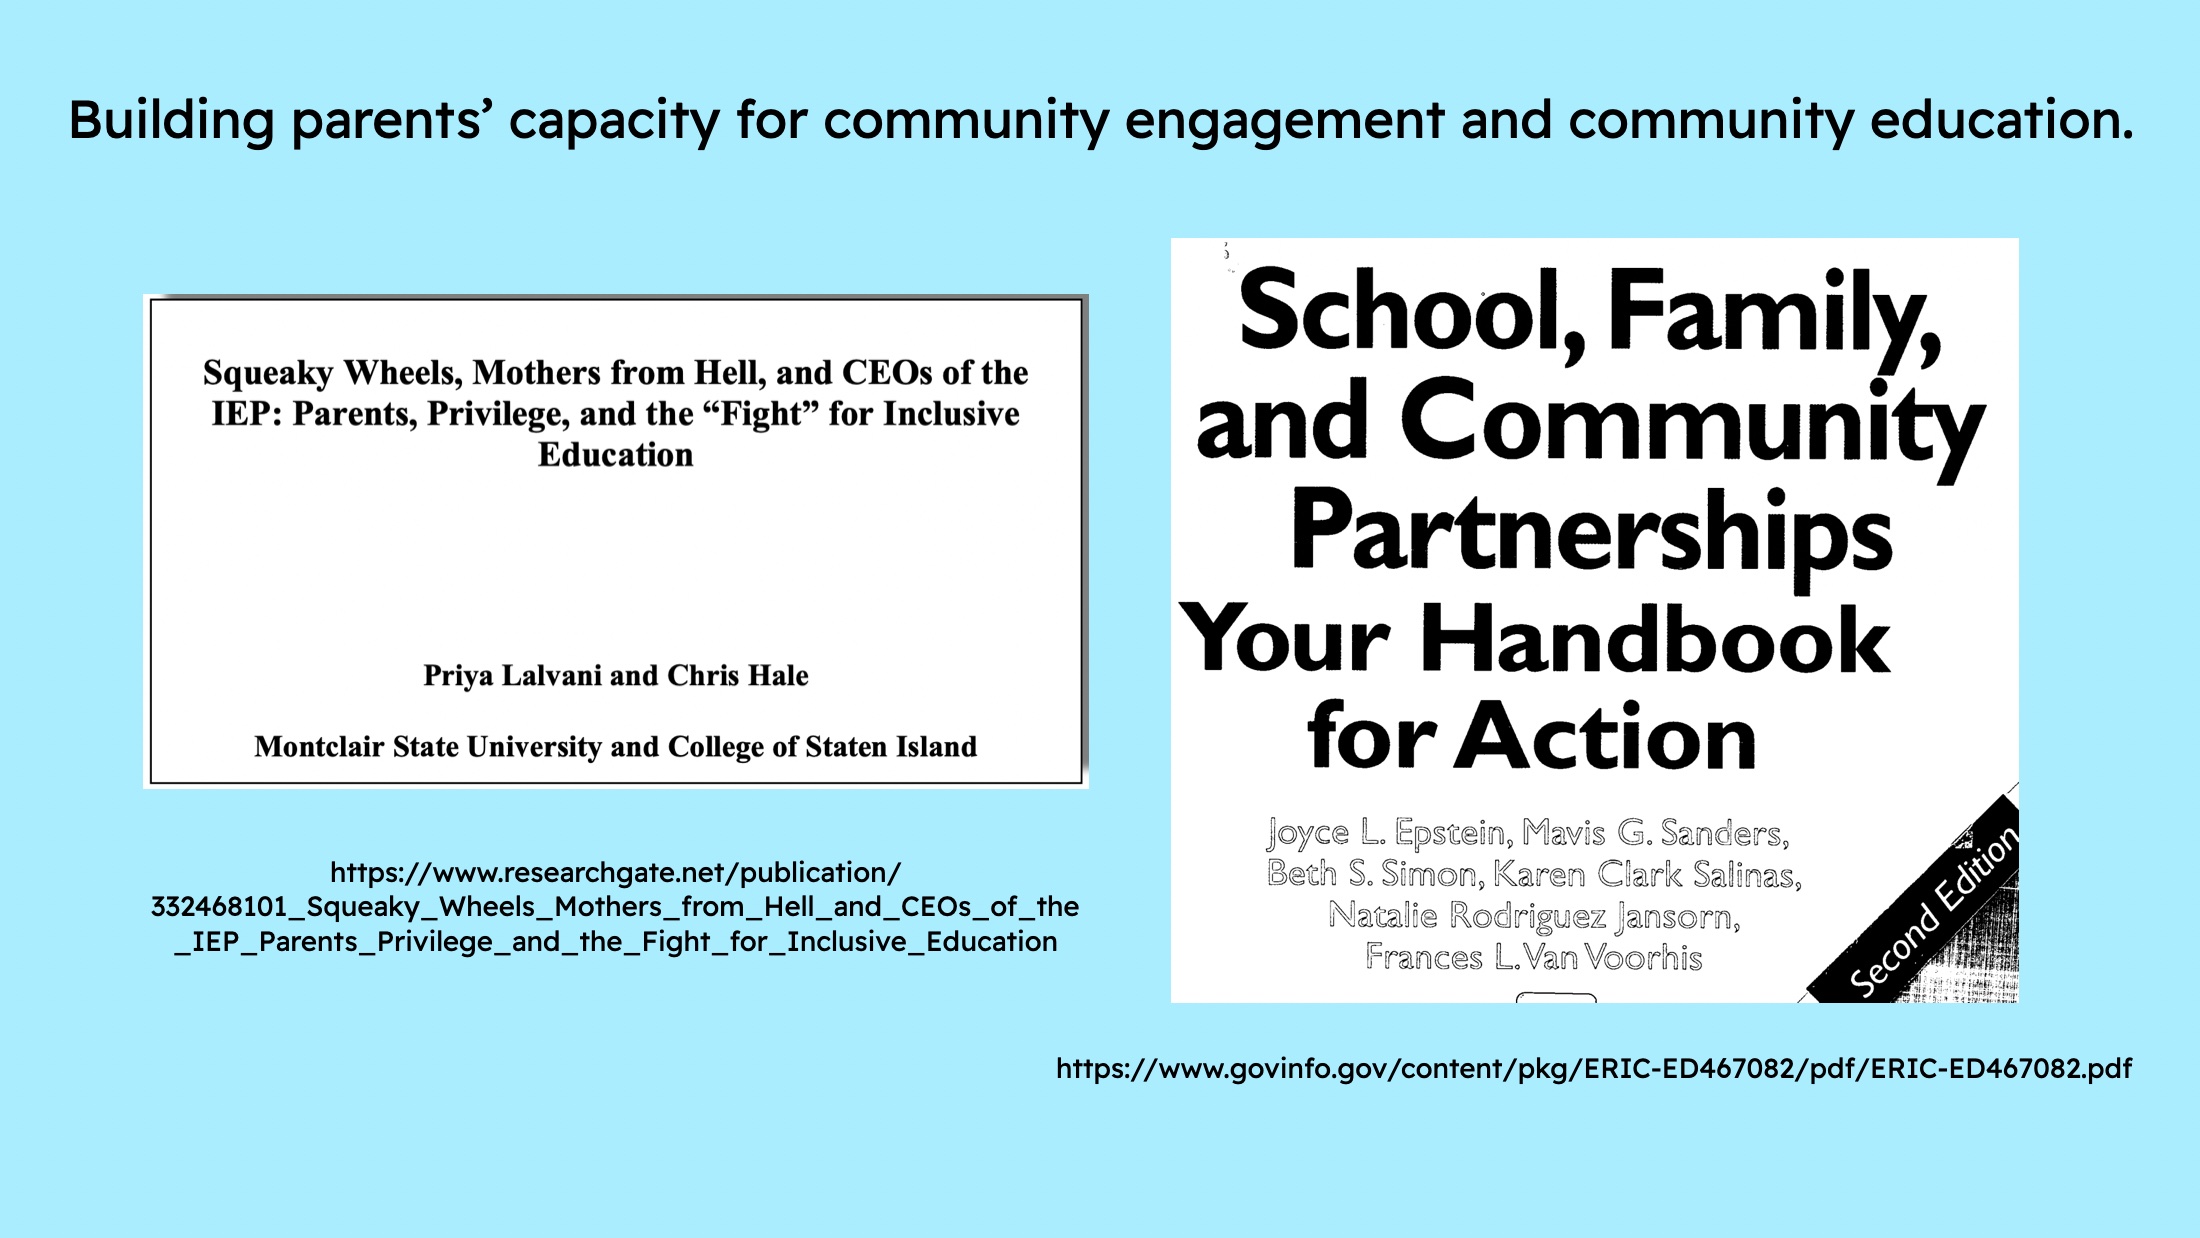 Slide titled "Building parents' capacity for community engagement and community education." One open access online journal and one open access online book referenced. Links to both (Squeaky Wheels; and School Family and Community Partnerships) in text of speech.